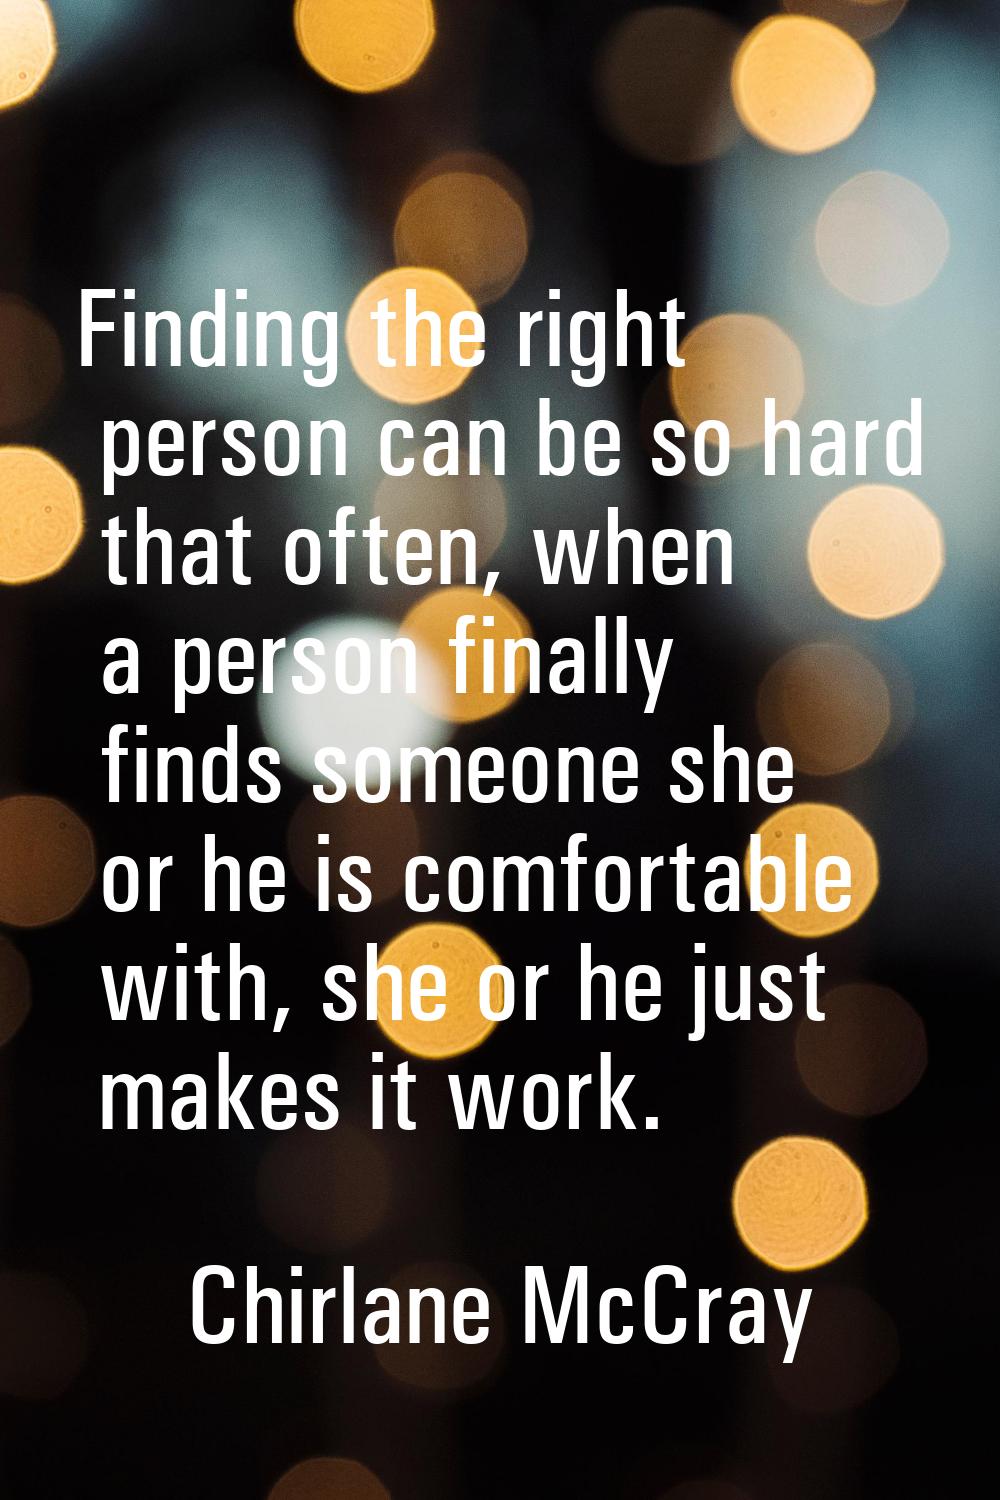 Finding the right person can be so hard that often, when a person finally finds someone she or he i